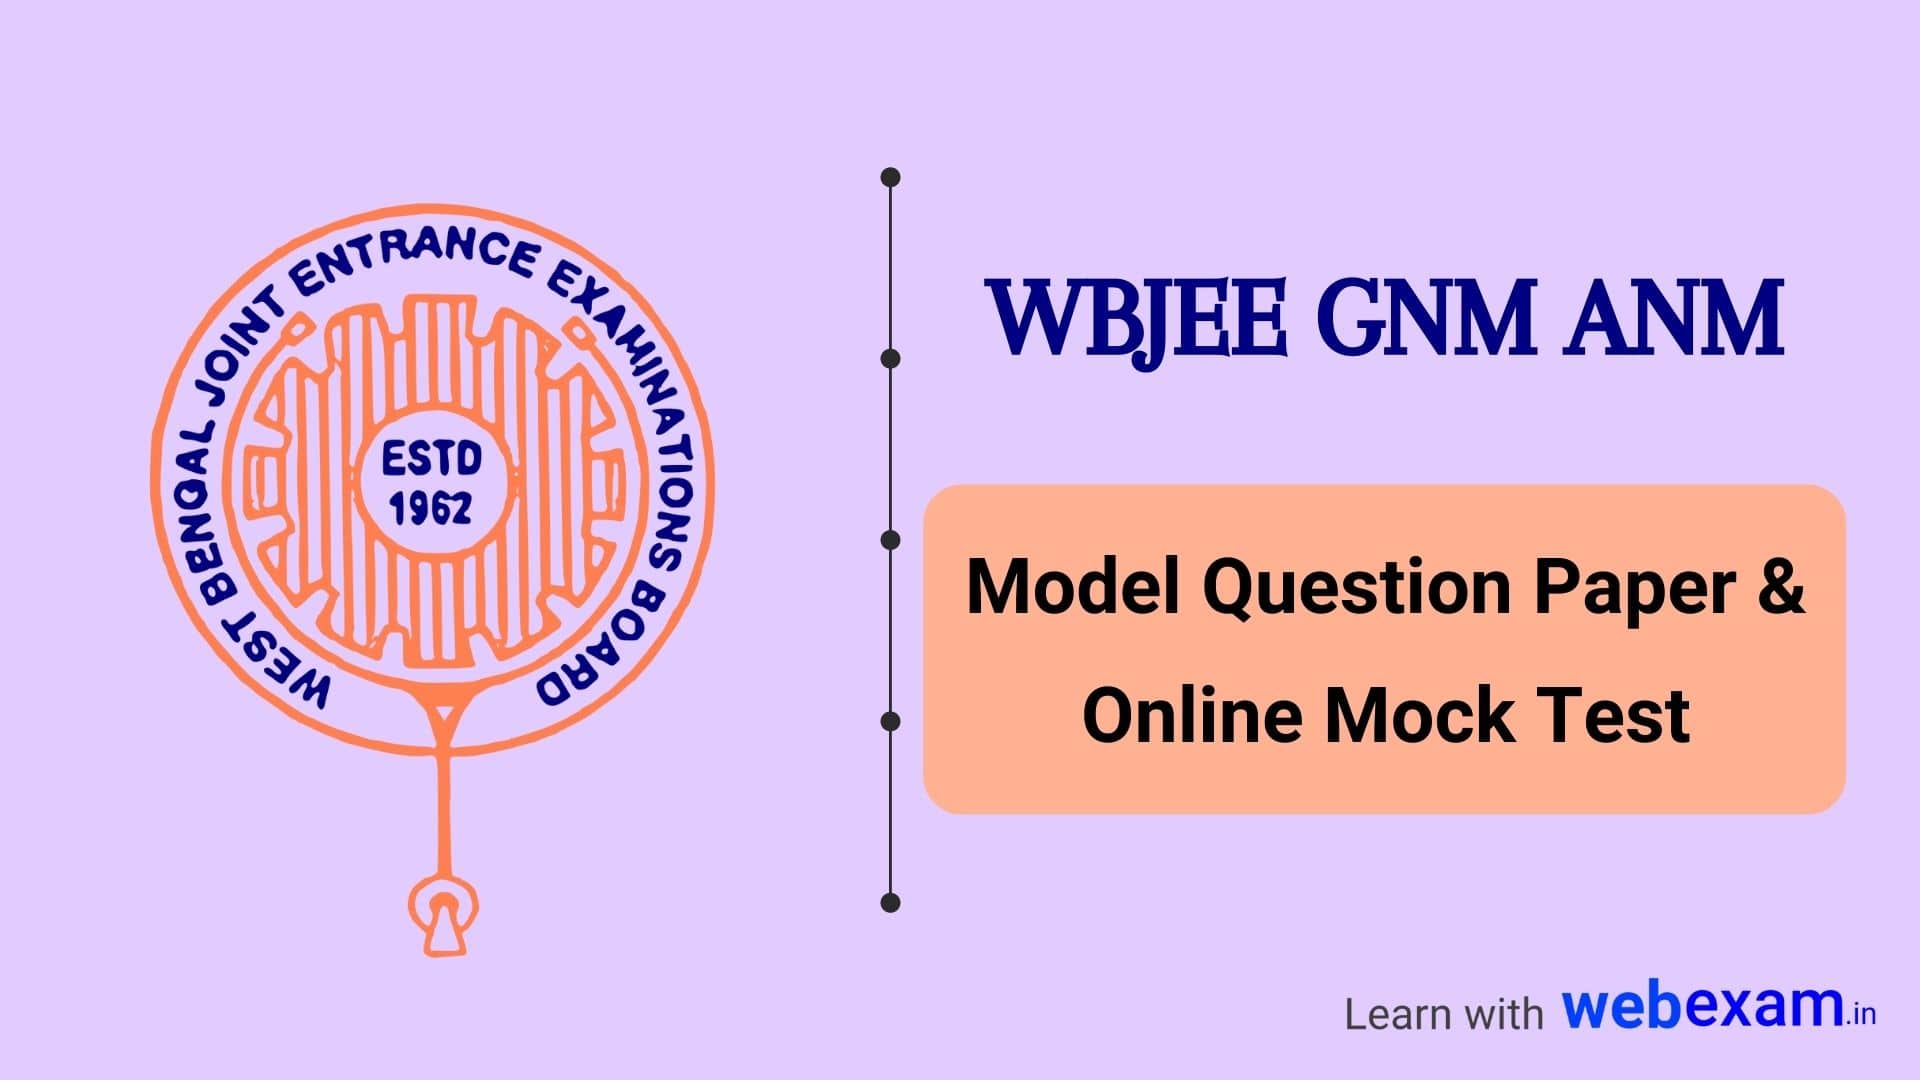 WBJEE GNM ANM Model Question Paper